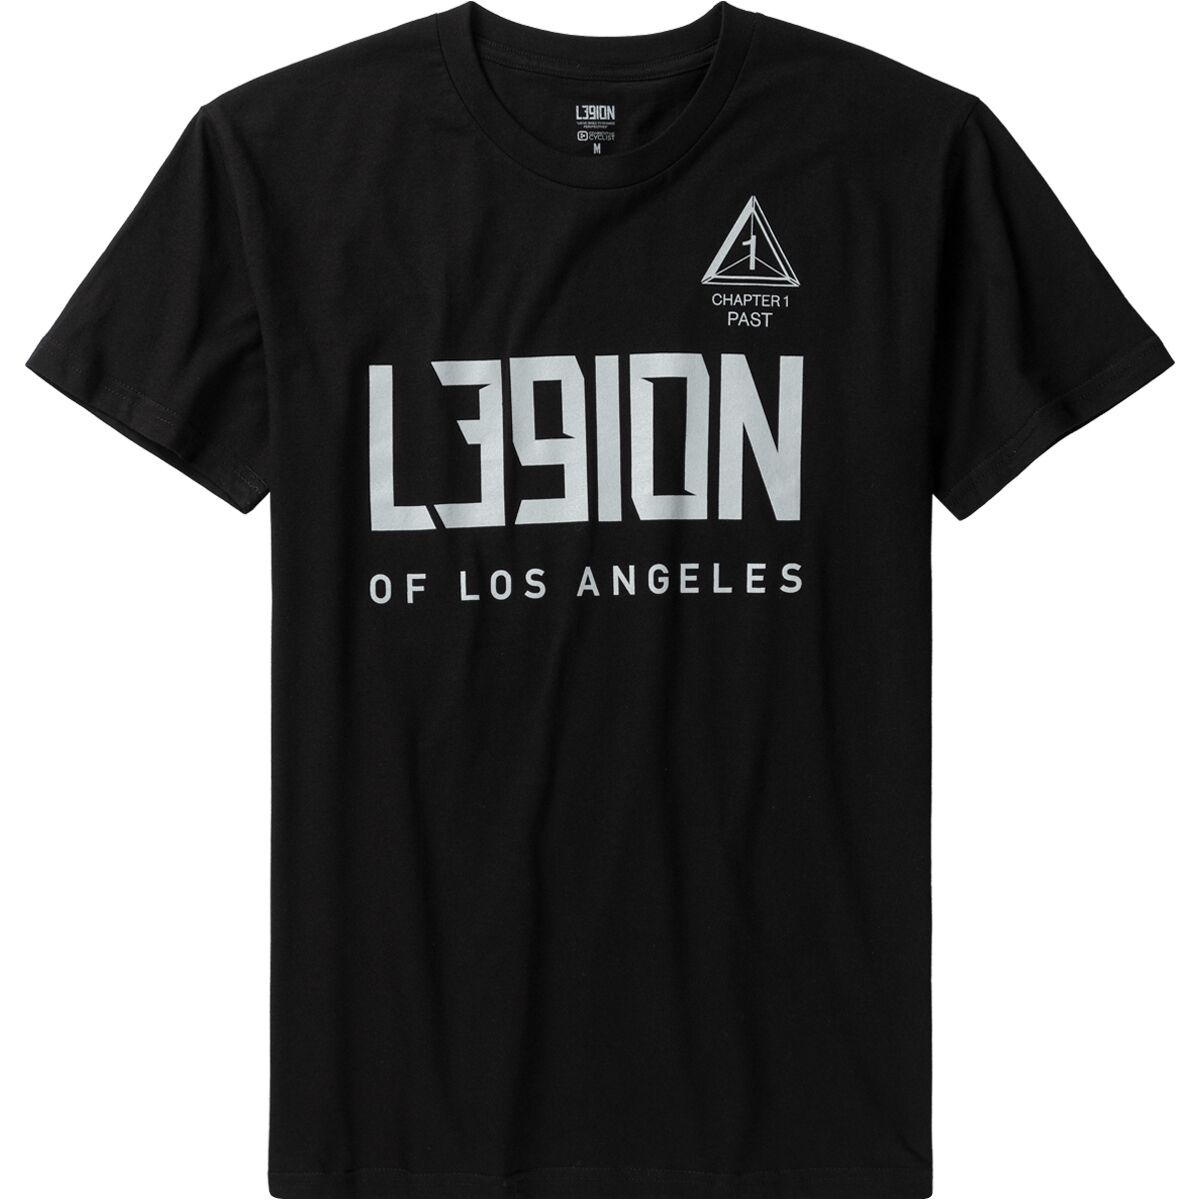 Competitive Cyclist L39ION Chapter 1 T-Shirt